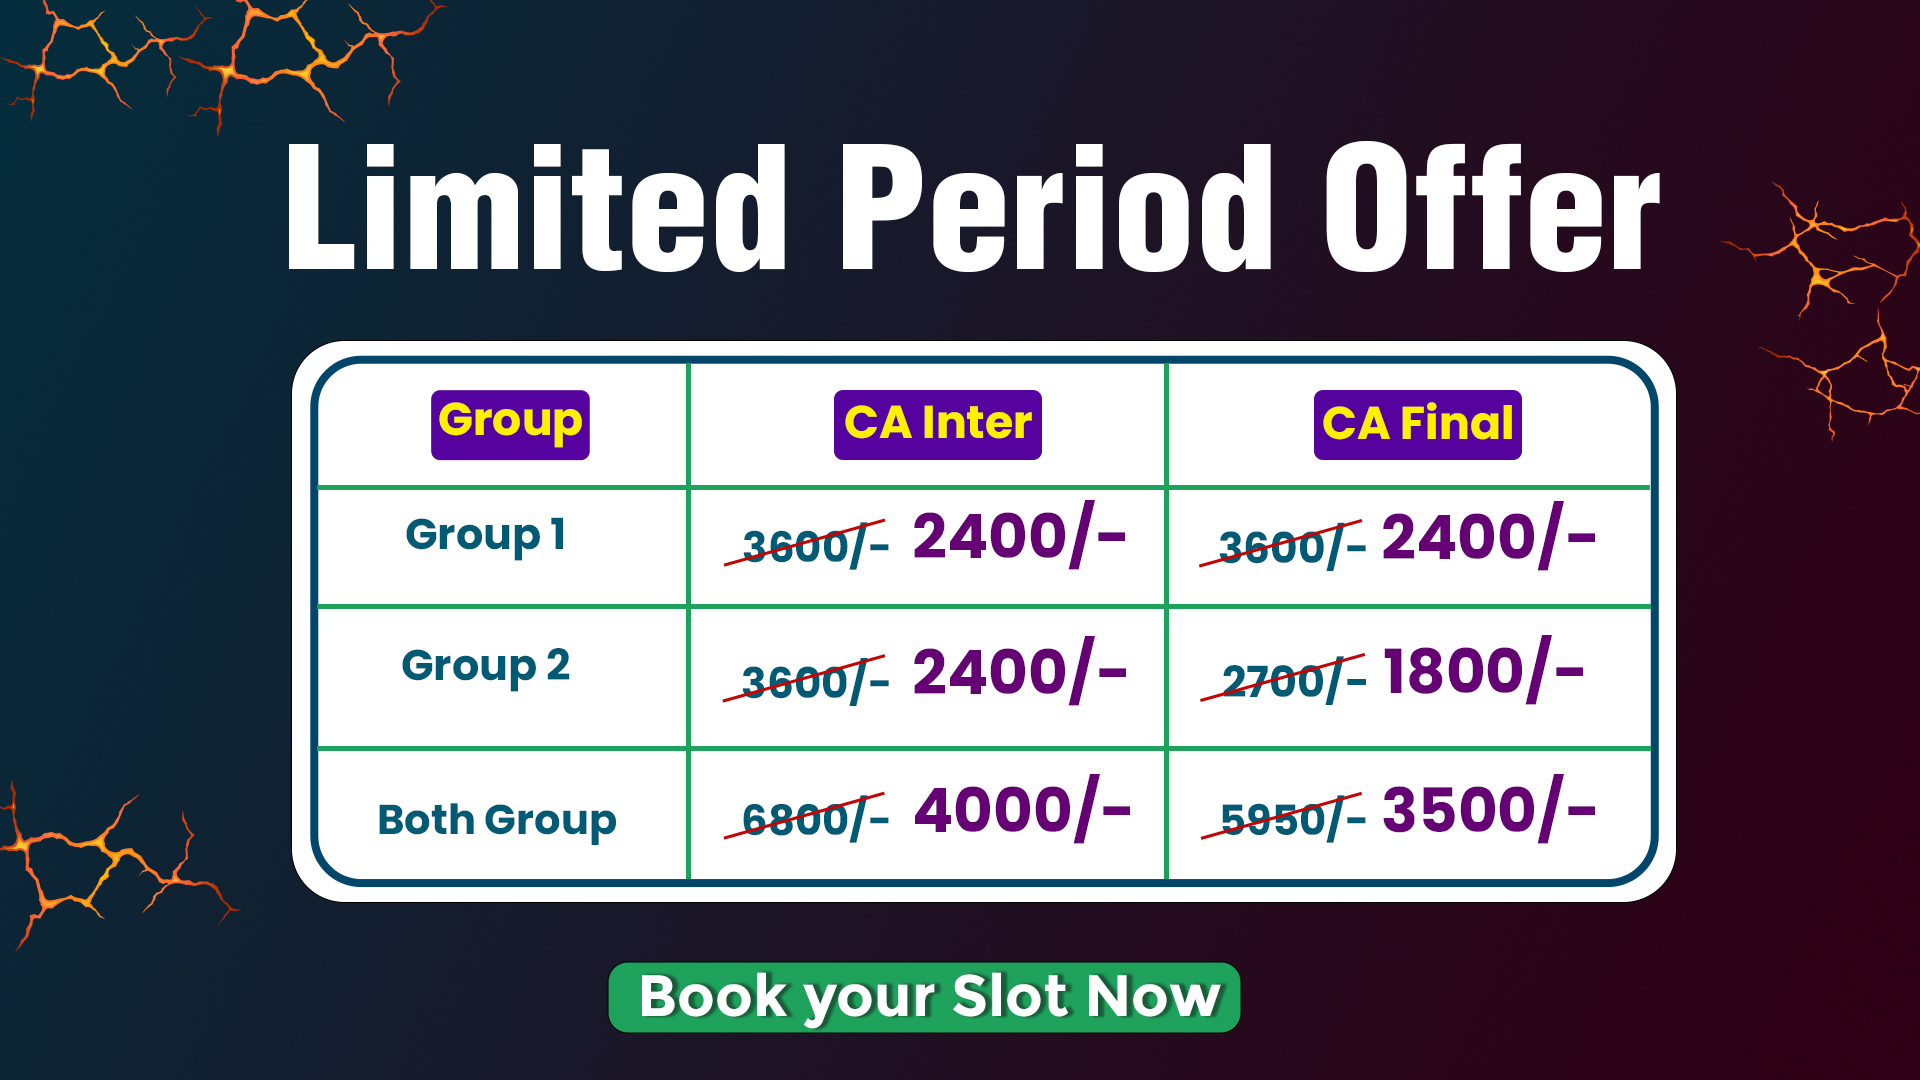 Limited Period Offer